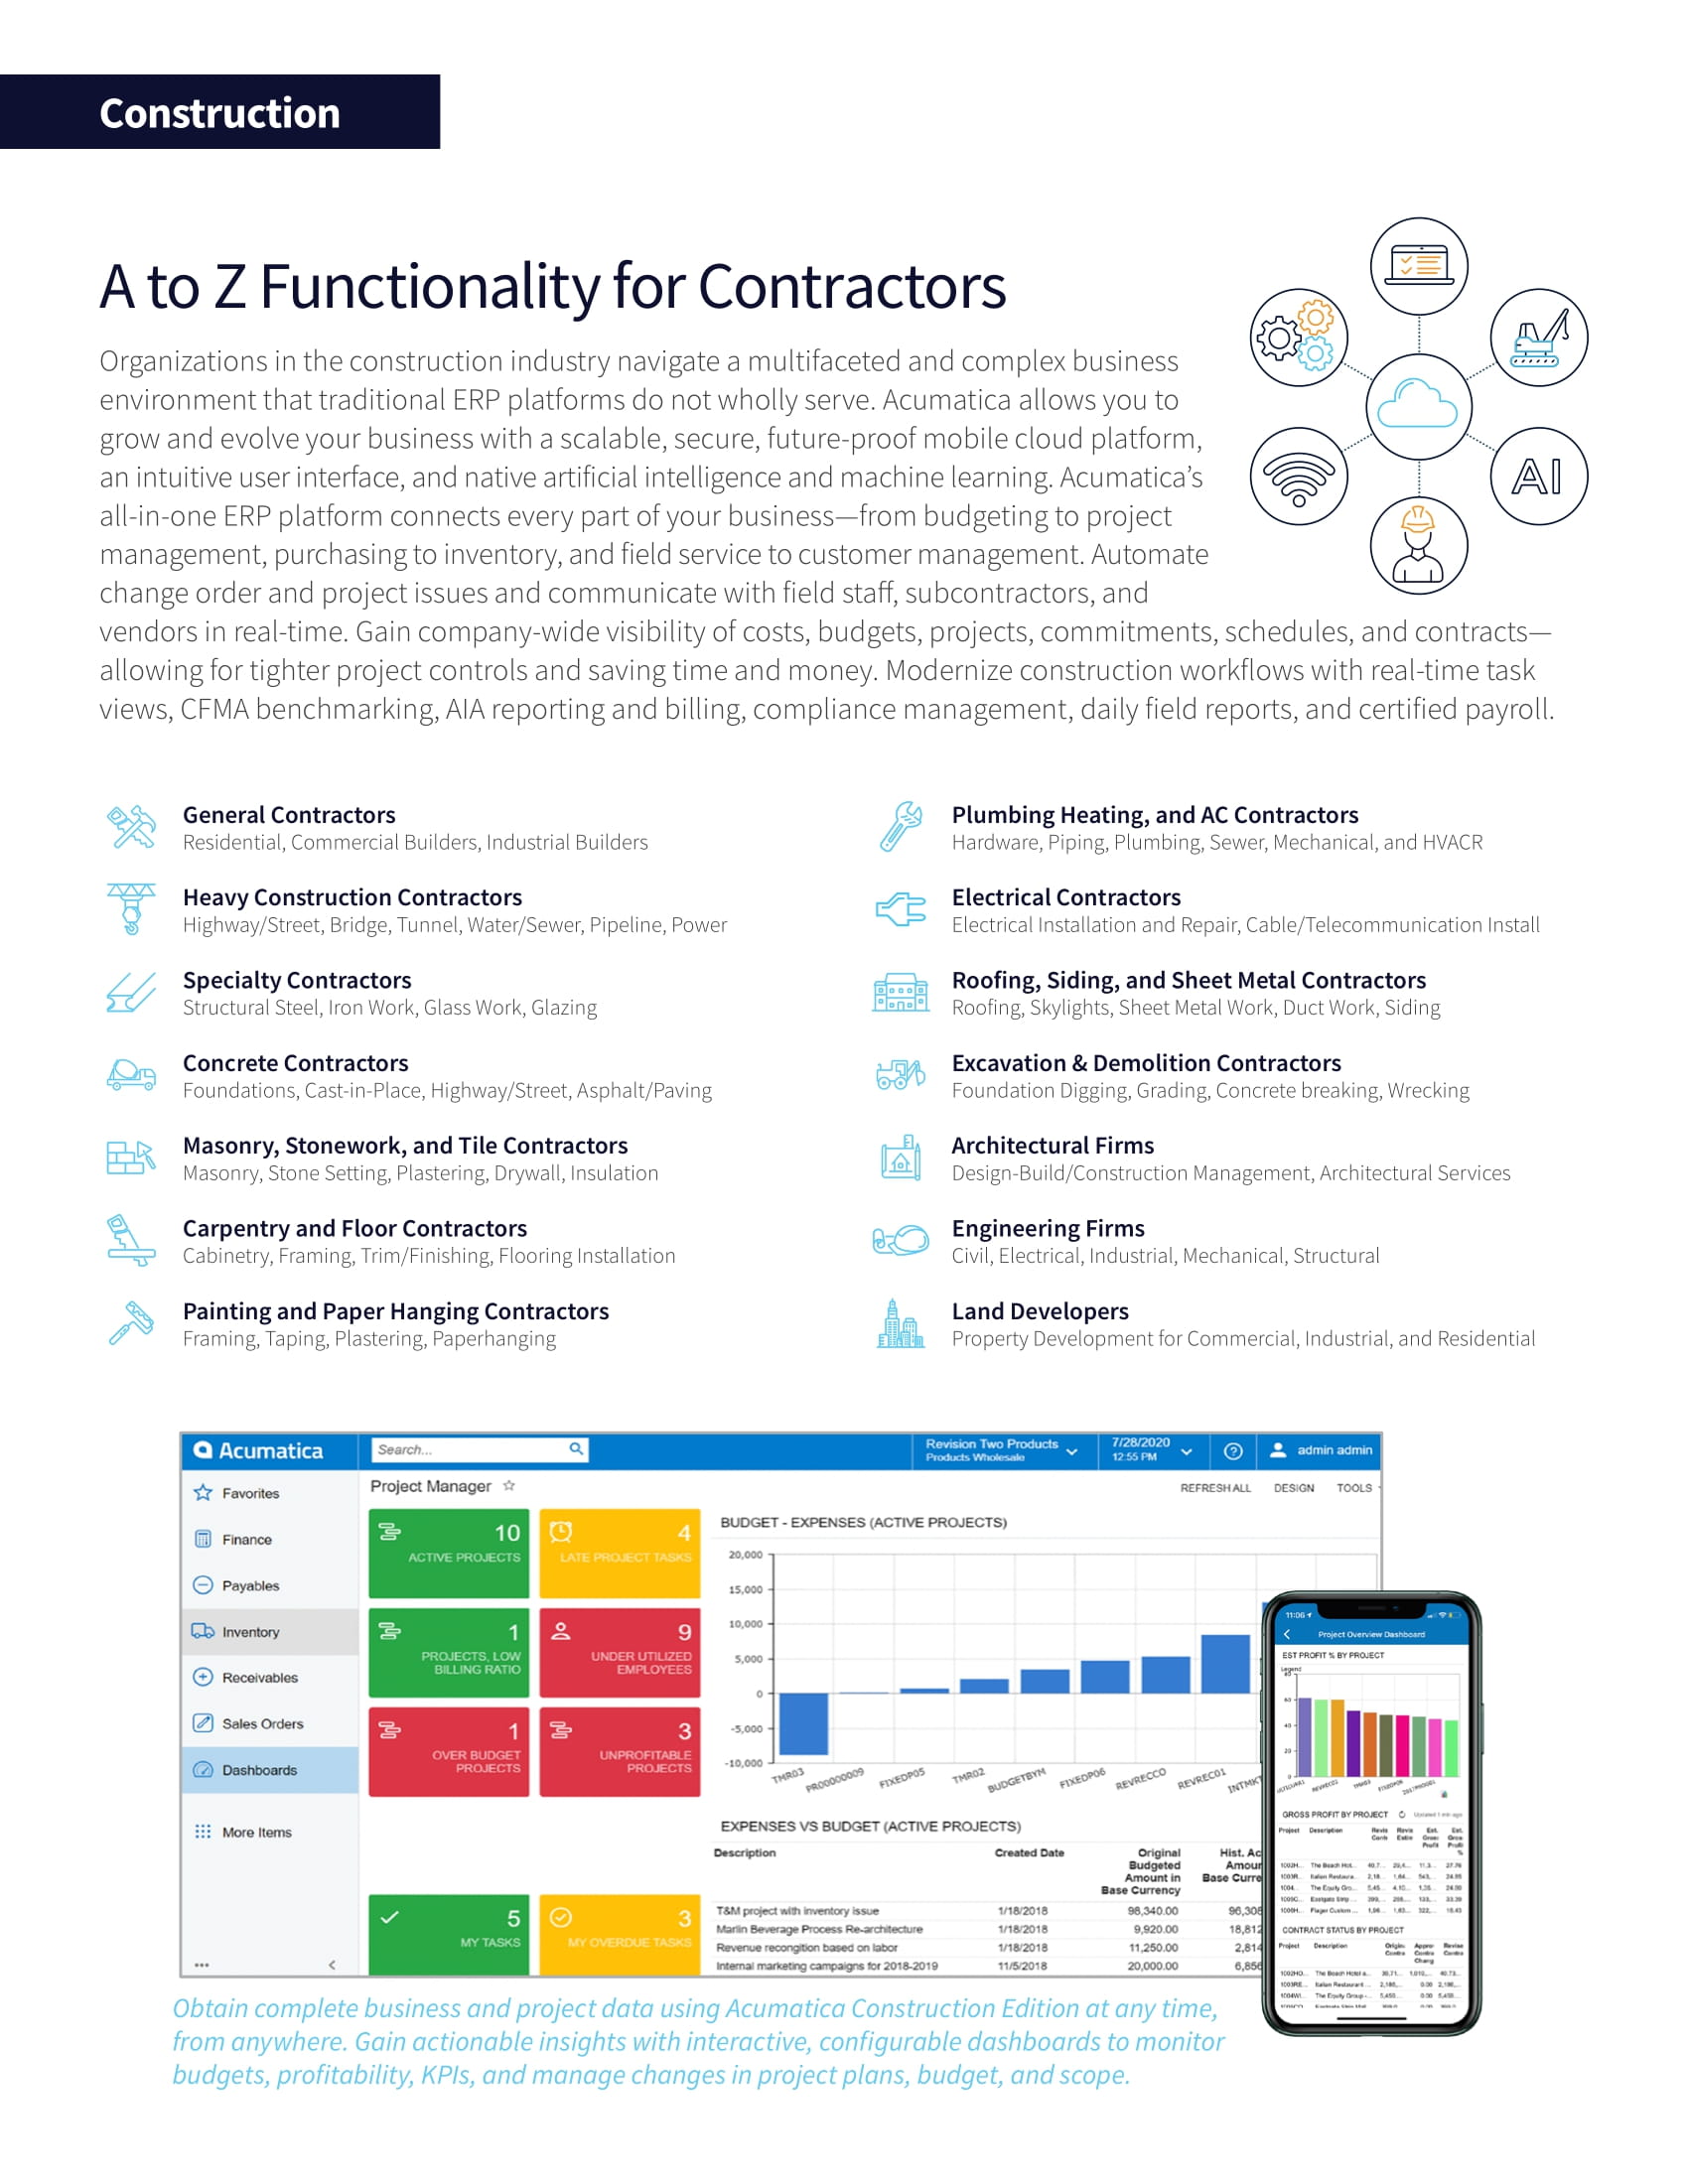 Acumatica Construction Edition:  A Complete ERP Solution to Meet All of Your Needs, page 2